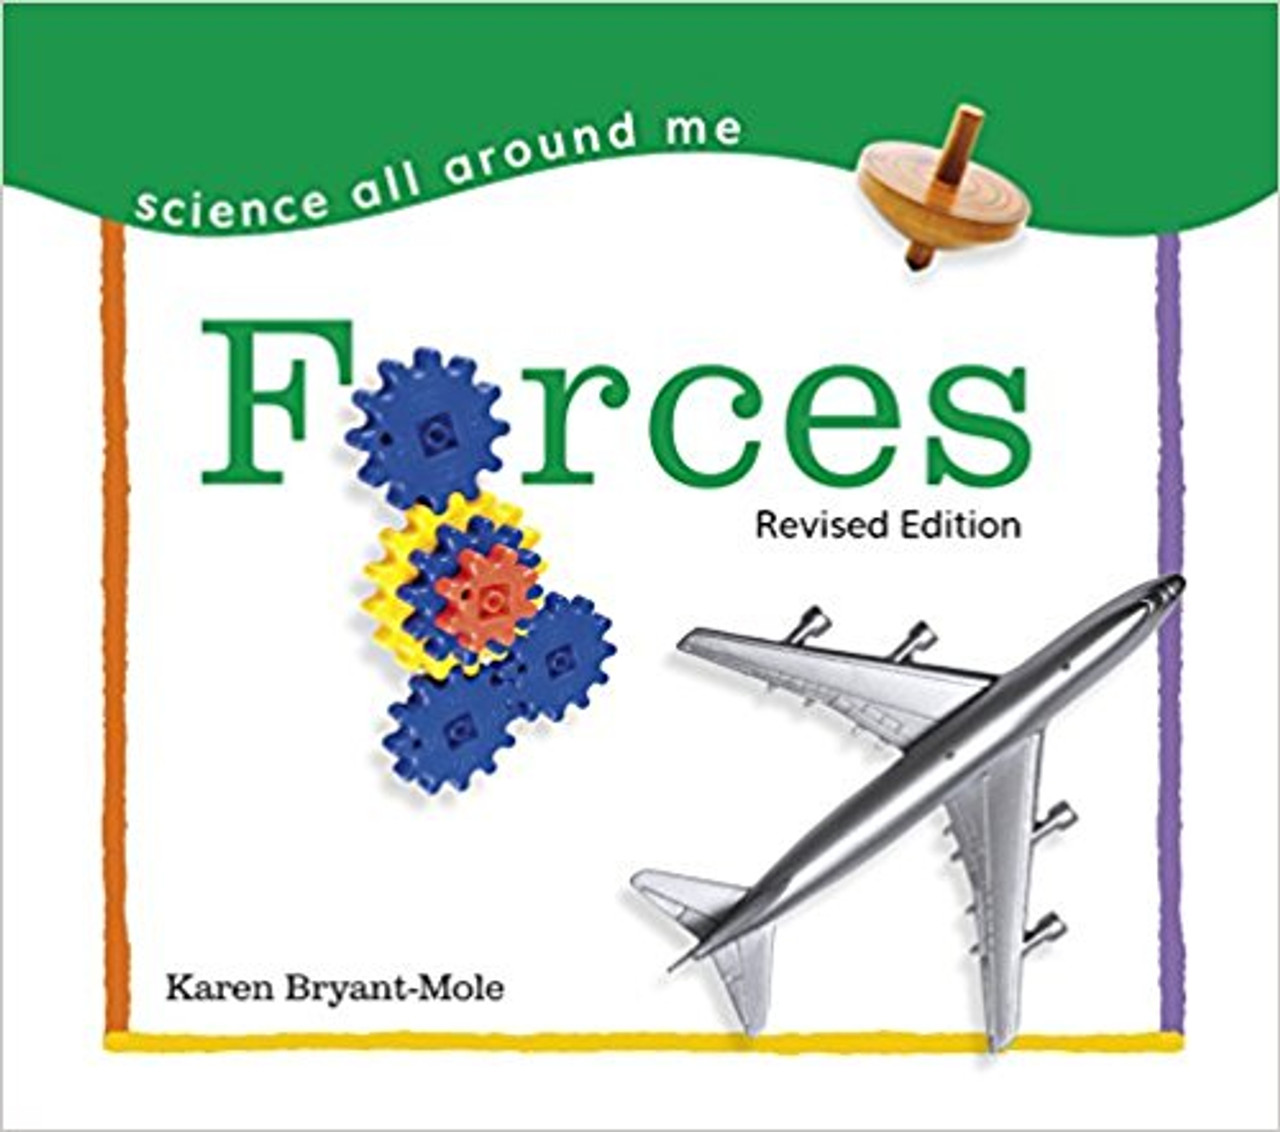 Forces (Science all Around me) by Karen Bryant-Mole